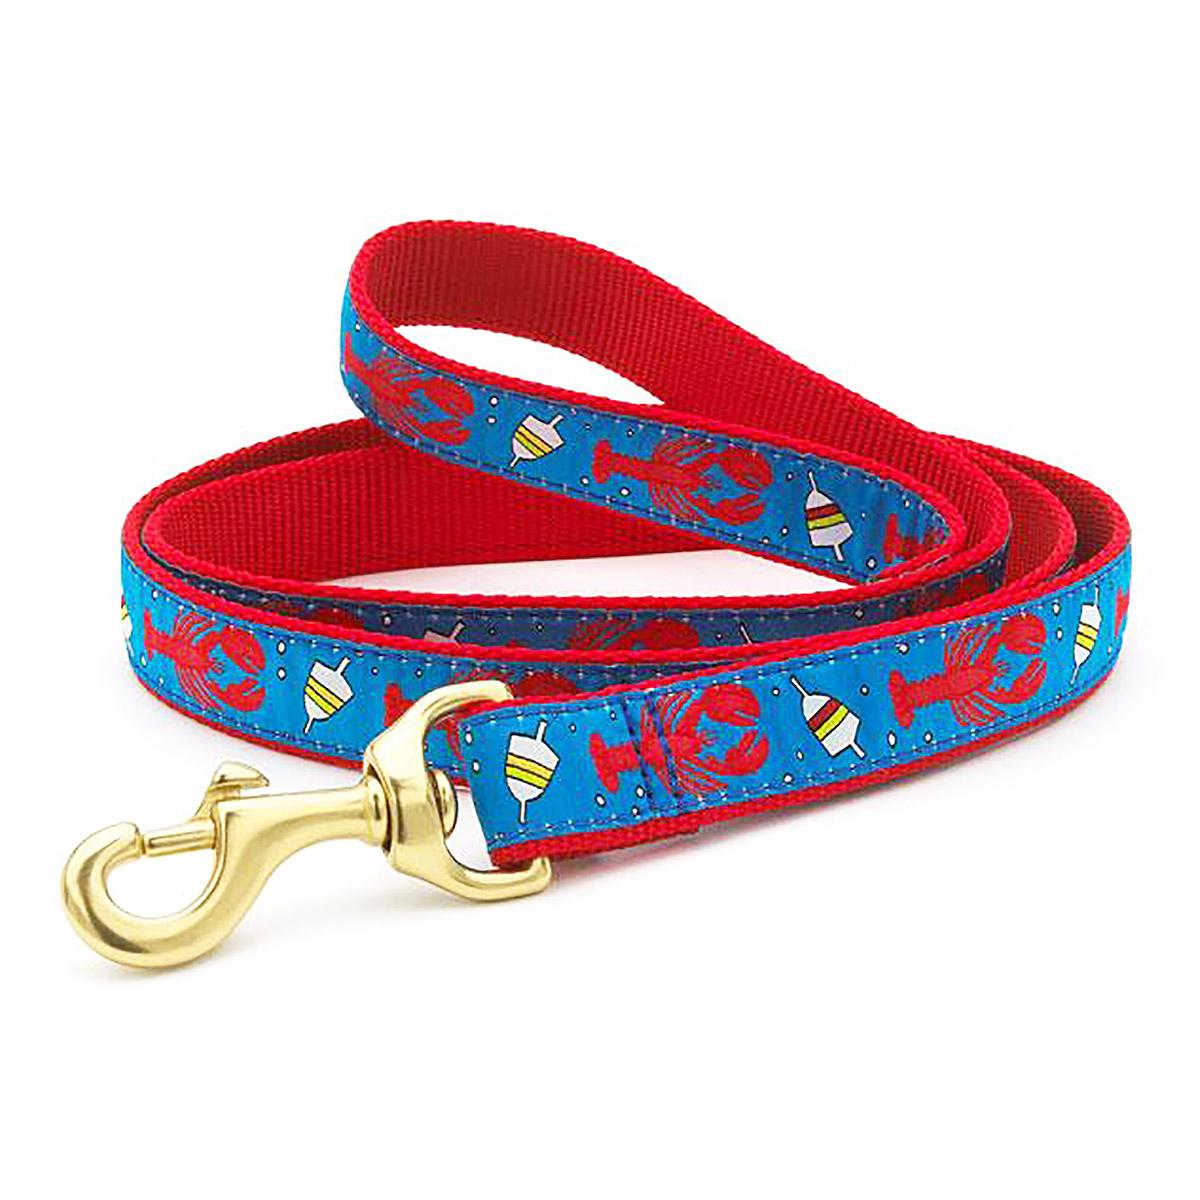 Lobster & Buoy Dog Leash by Up Country